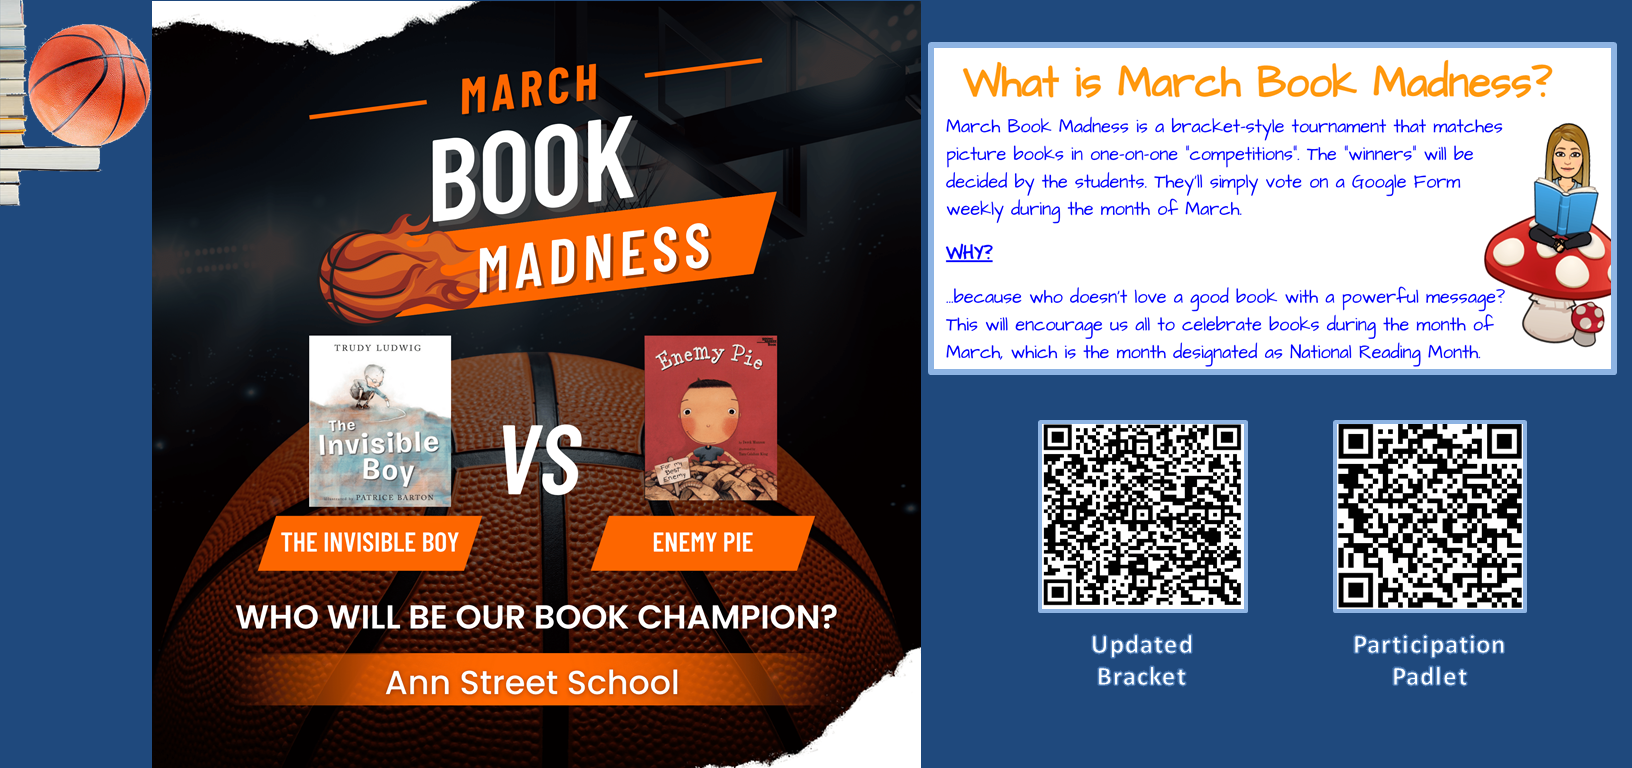 March Book Madness. The Invisible Boy Vs. Enemy Pie. Who will be our book champion? Ann Street School.What is March Book Madness? March book madness is a bracket-style tournament that matches picture books in one-on-one 'competitions'. The 'winners' will be decided by the students. They'll simply vote on google form weekly during the month of March. Why? because who doesn't love a good book with a powerful message? This will encourage us all to celebrate books during the month of March, which is the month designated as National Reading Month.